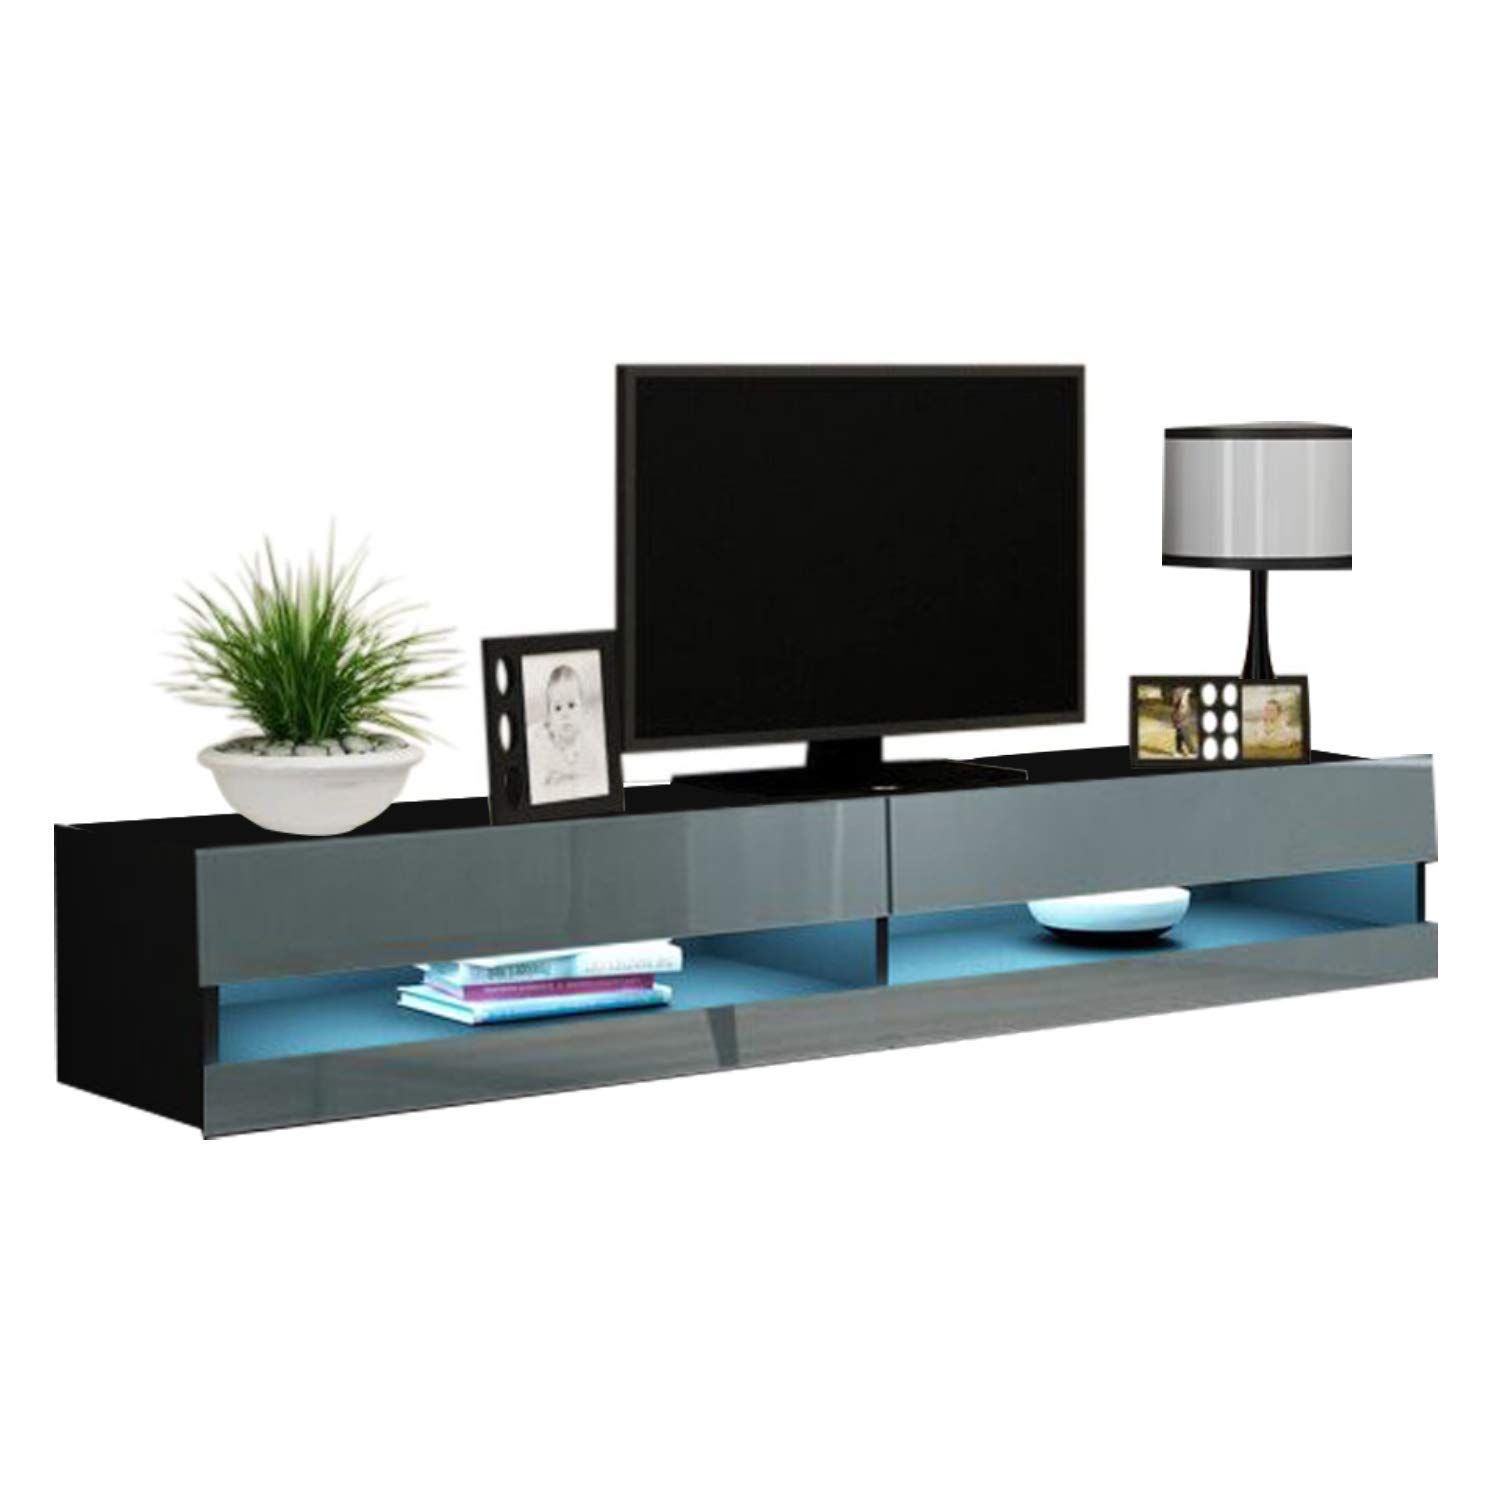 Vigo New 180 Led Wall Mounted 71" Floating Tv Stand, Black With Regard To 57'' Led Tv Stands Cabinet (View 14 of 15)